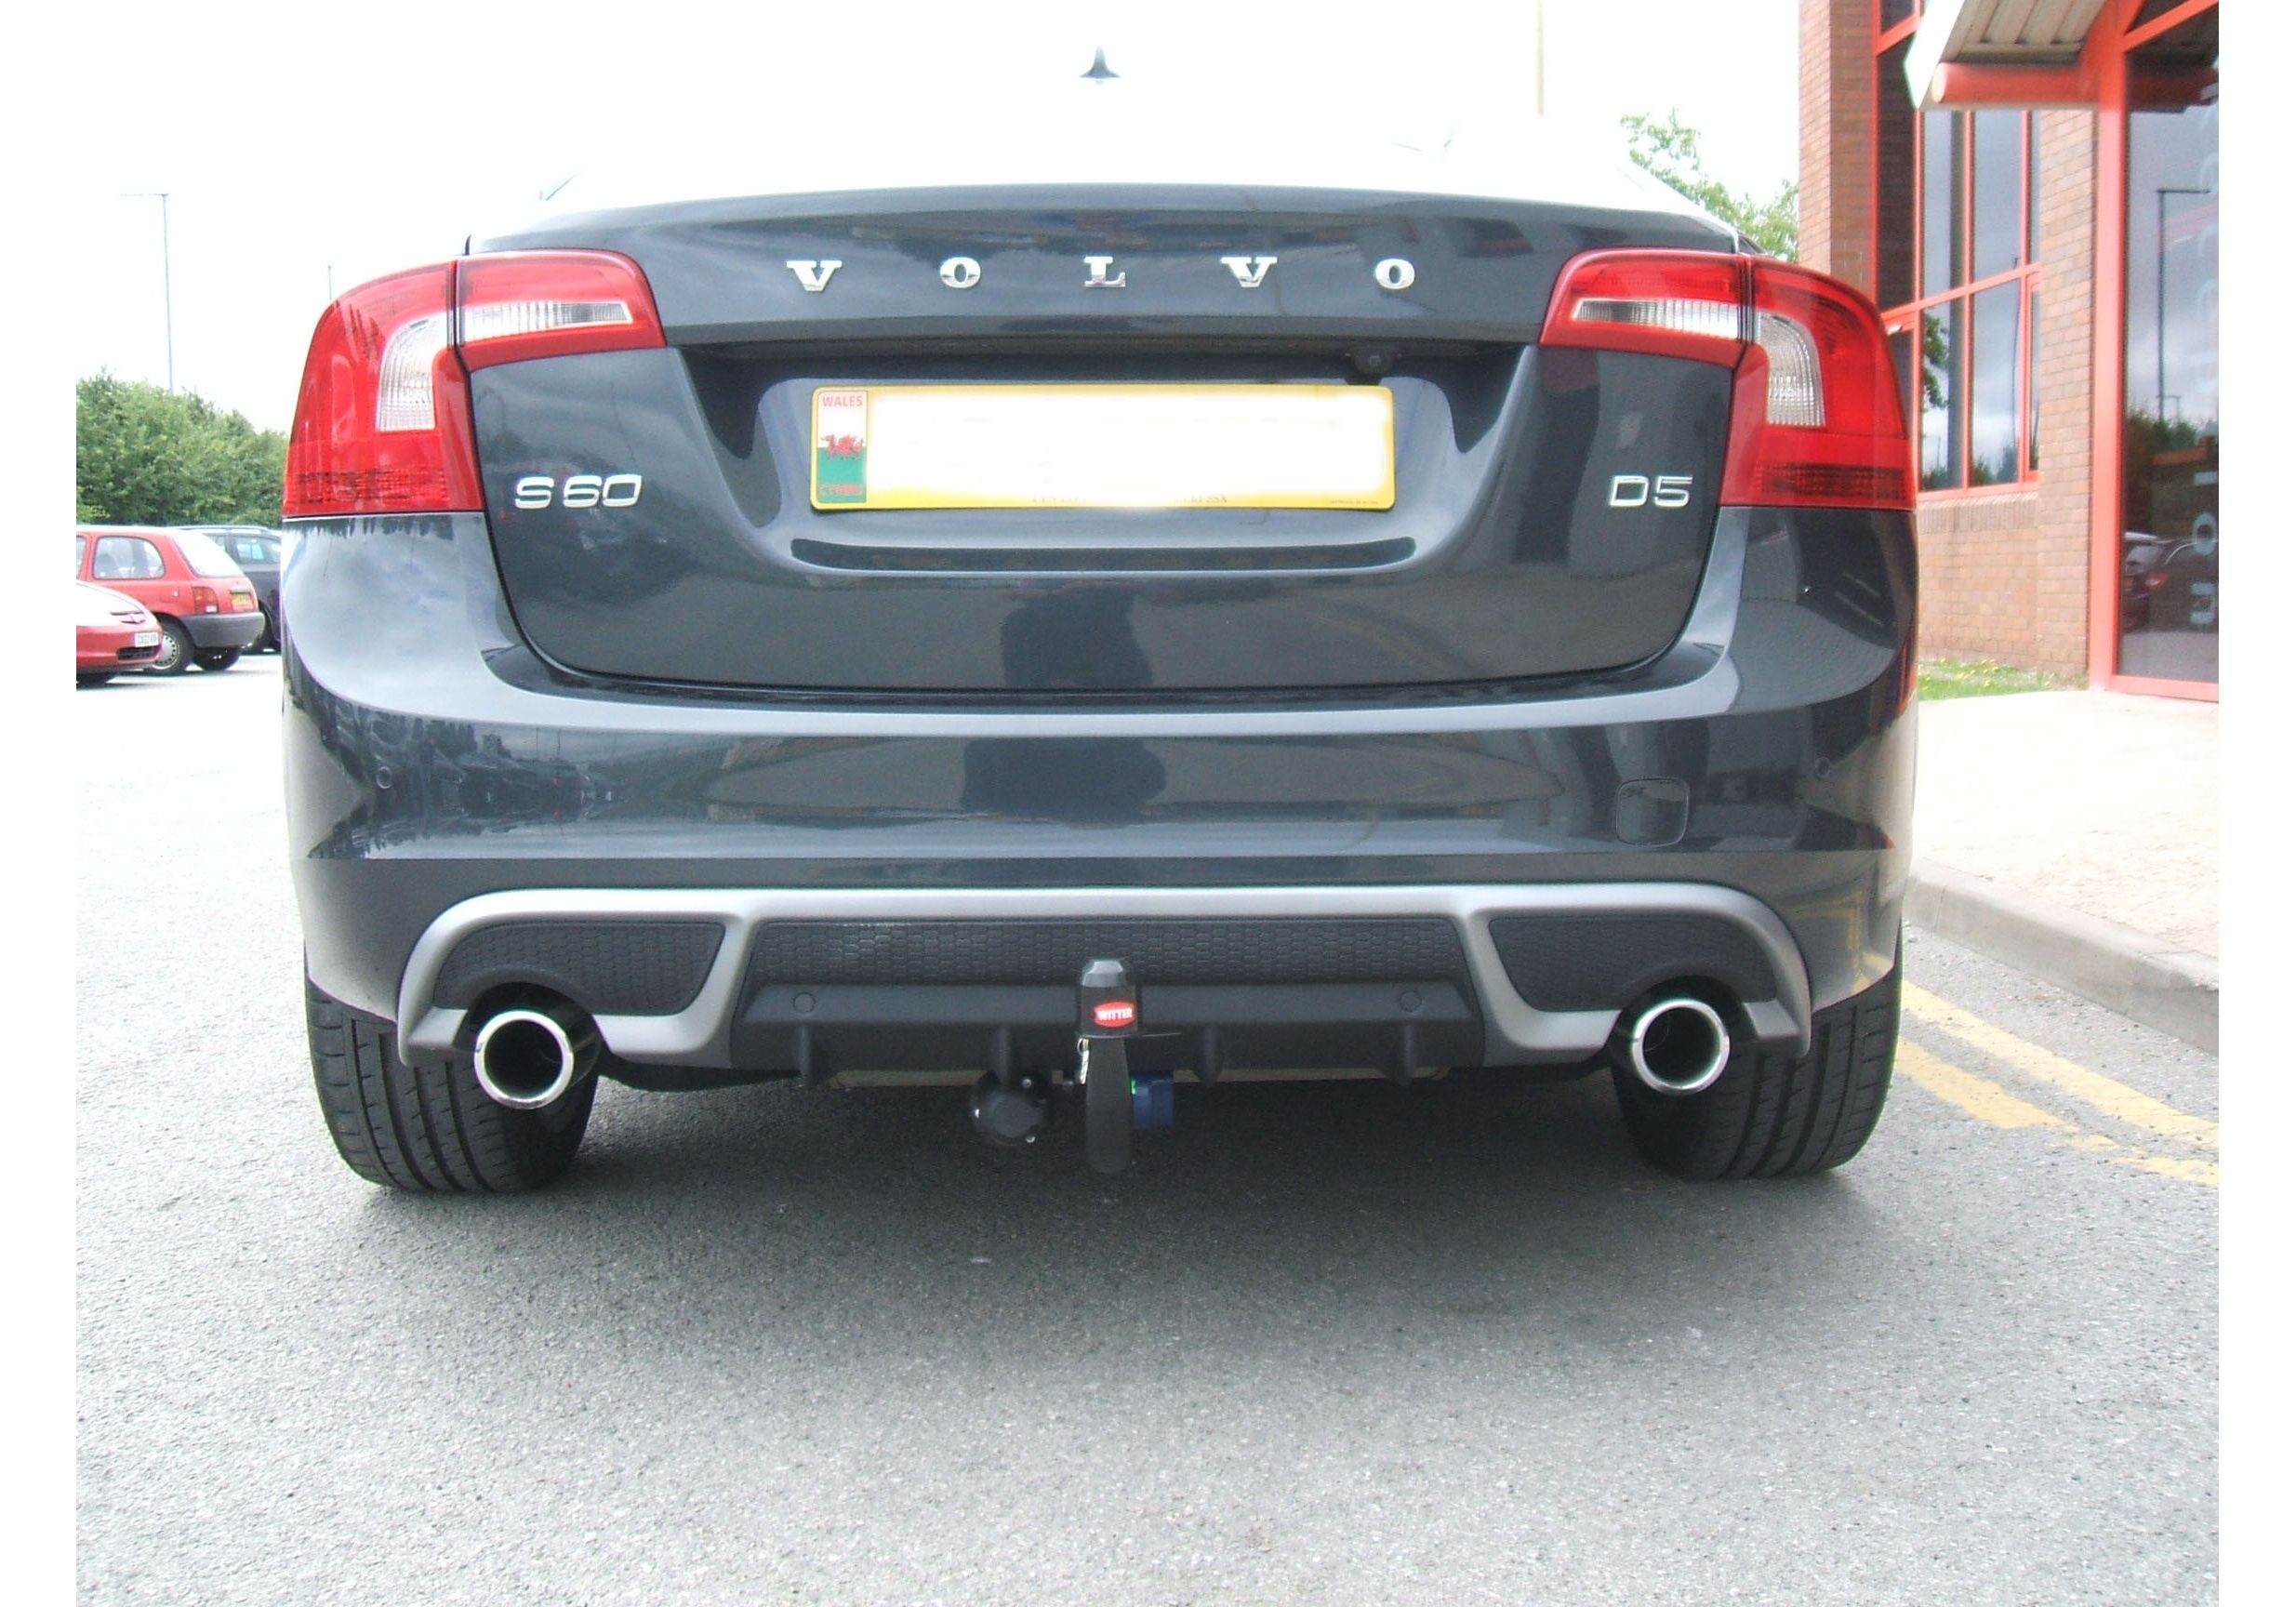 VOLVO S60 2000-2003 P26 Saloon Fixed Swan Neck Towbar with Electric Kit 13Pin 